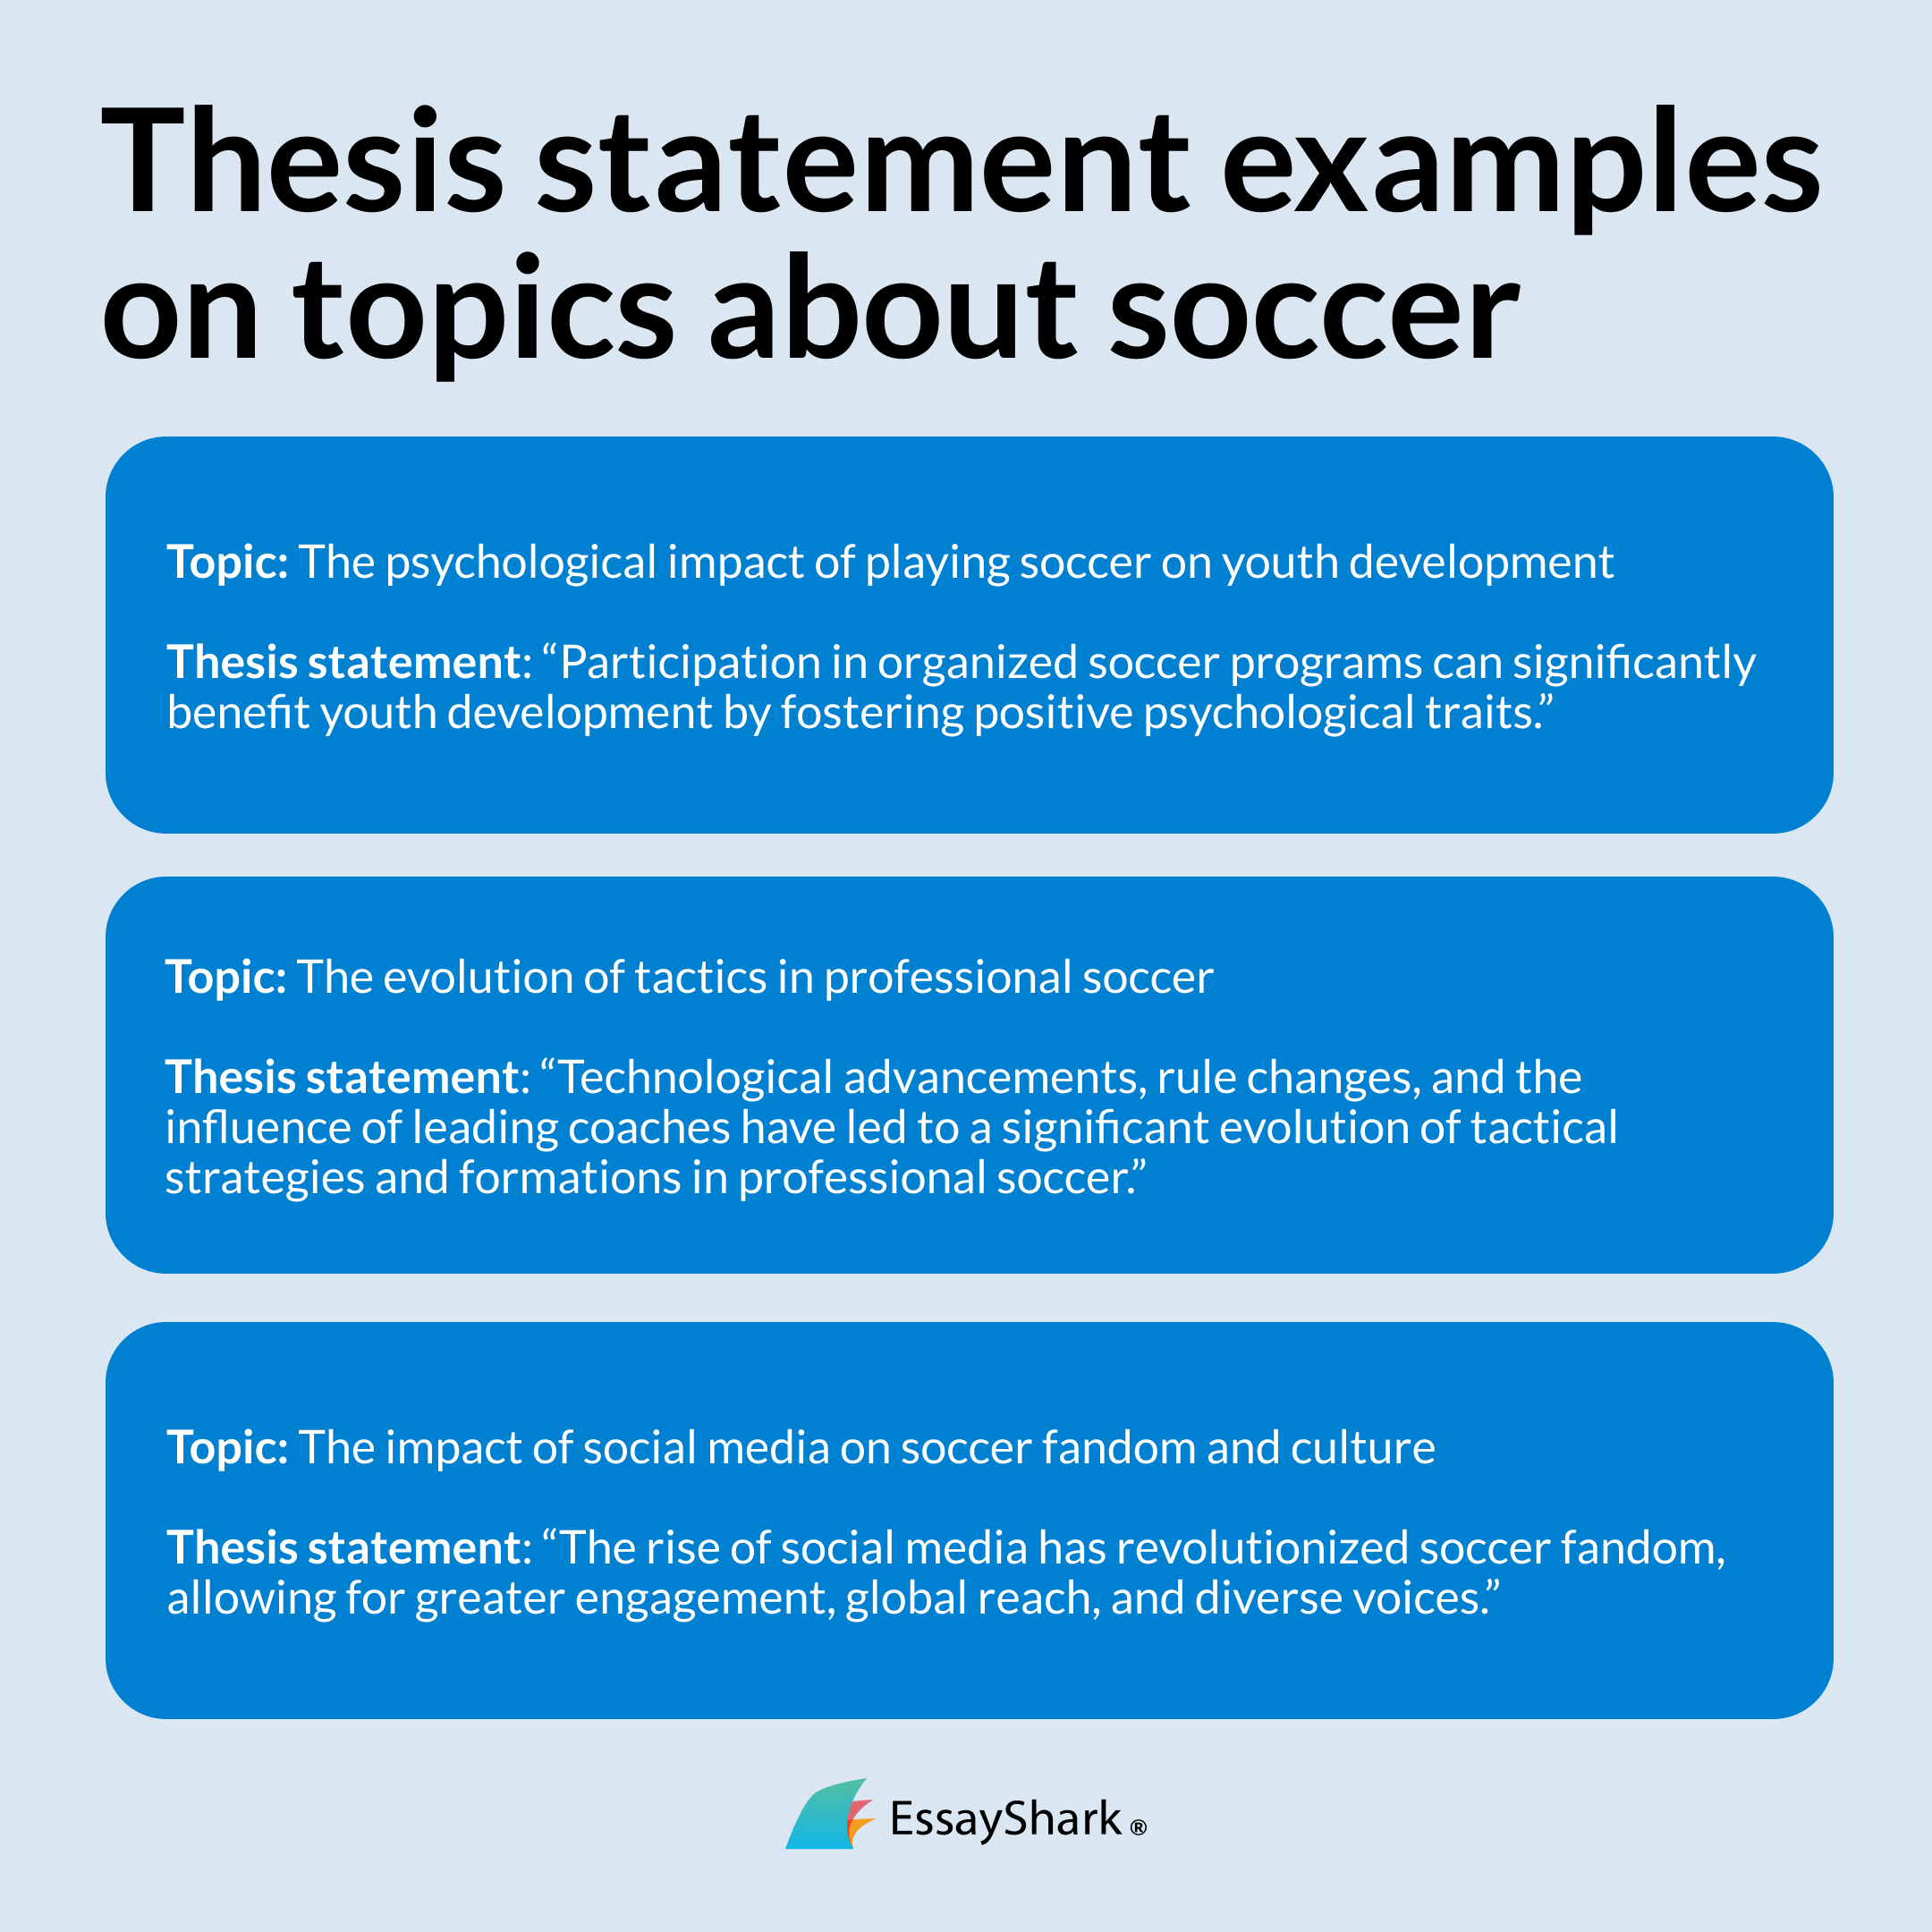 thesis statement on soccer